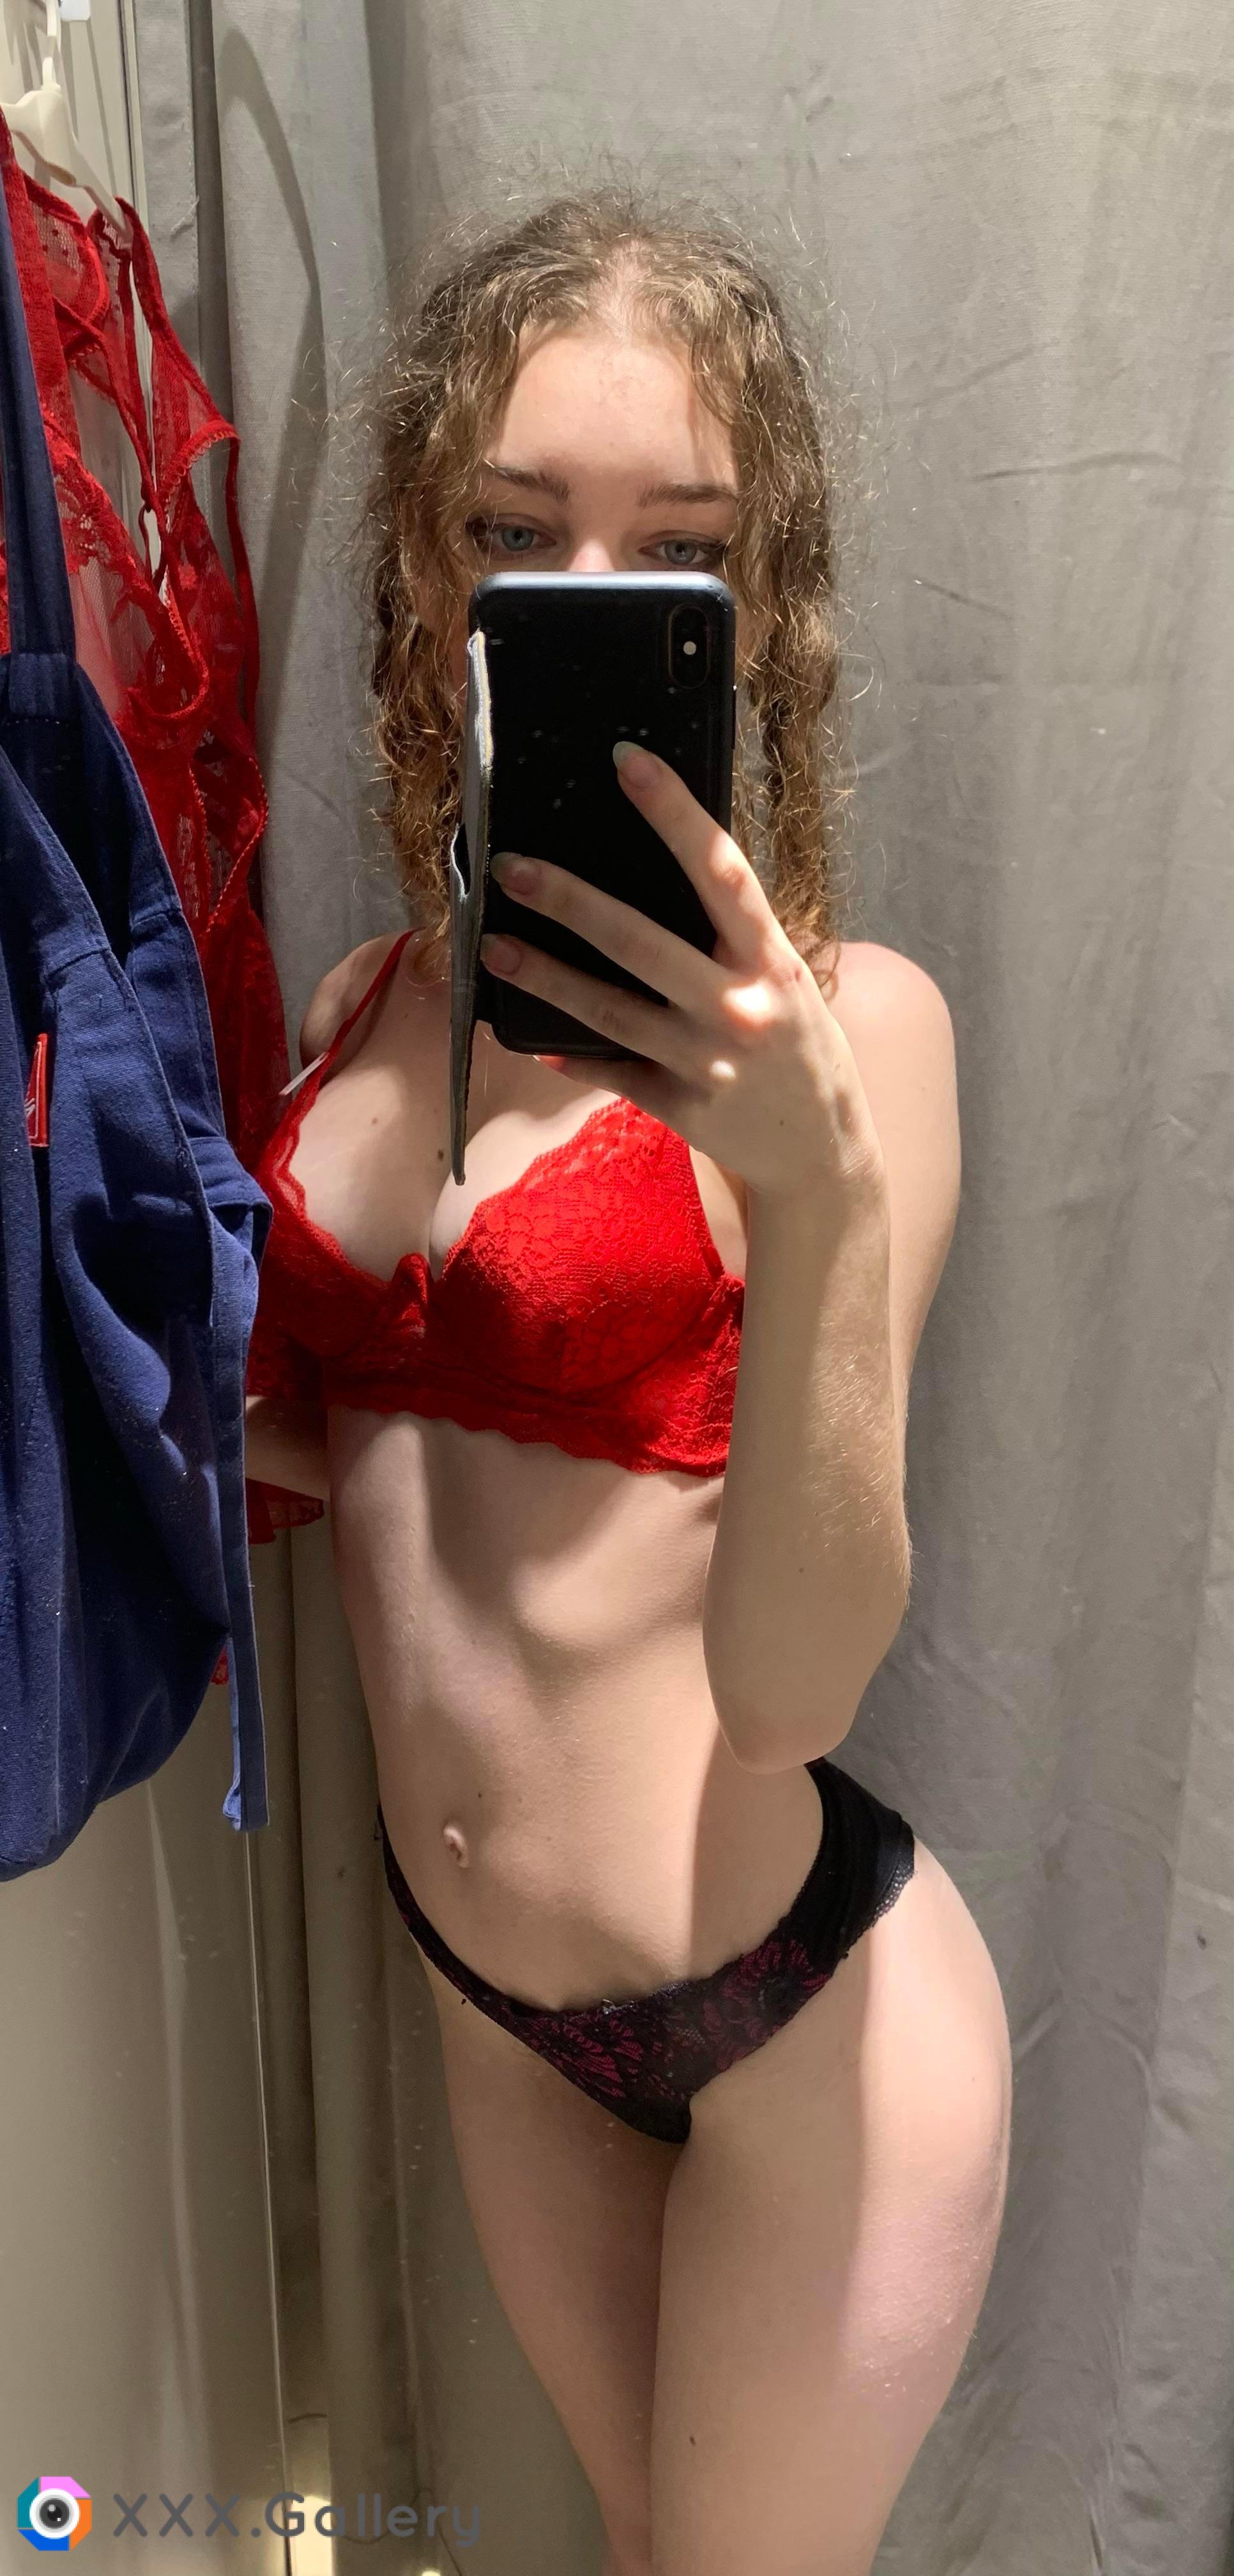 Not sure about the bra is red my color or